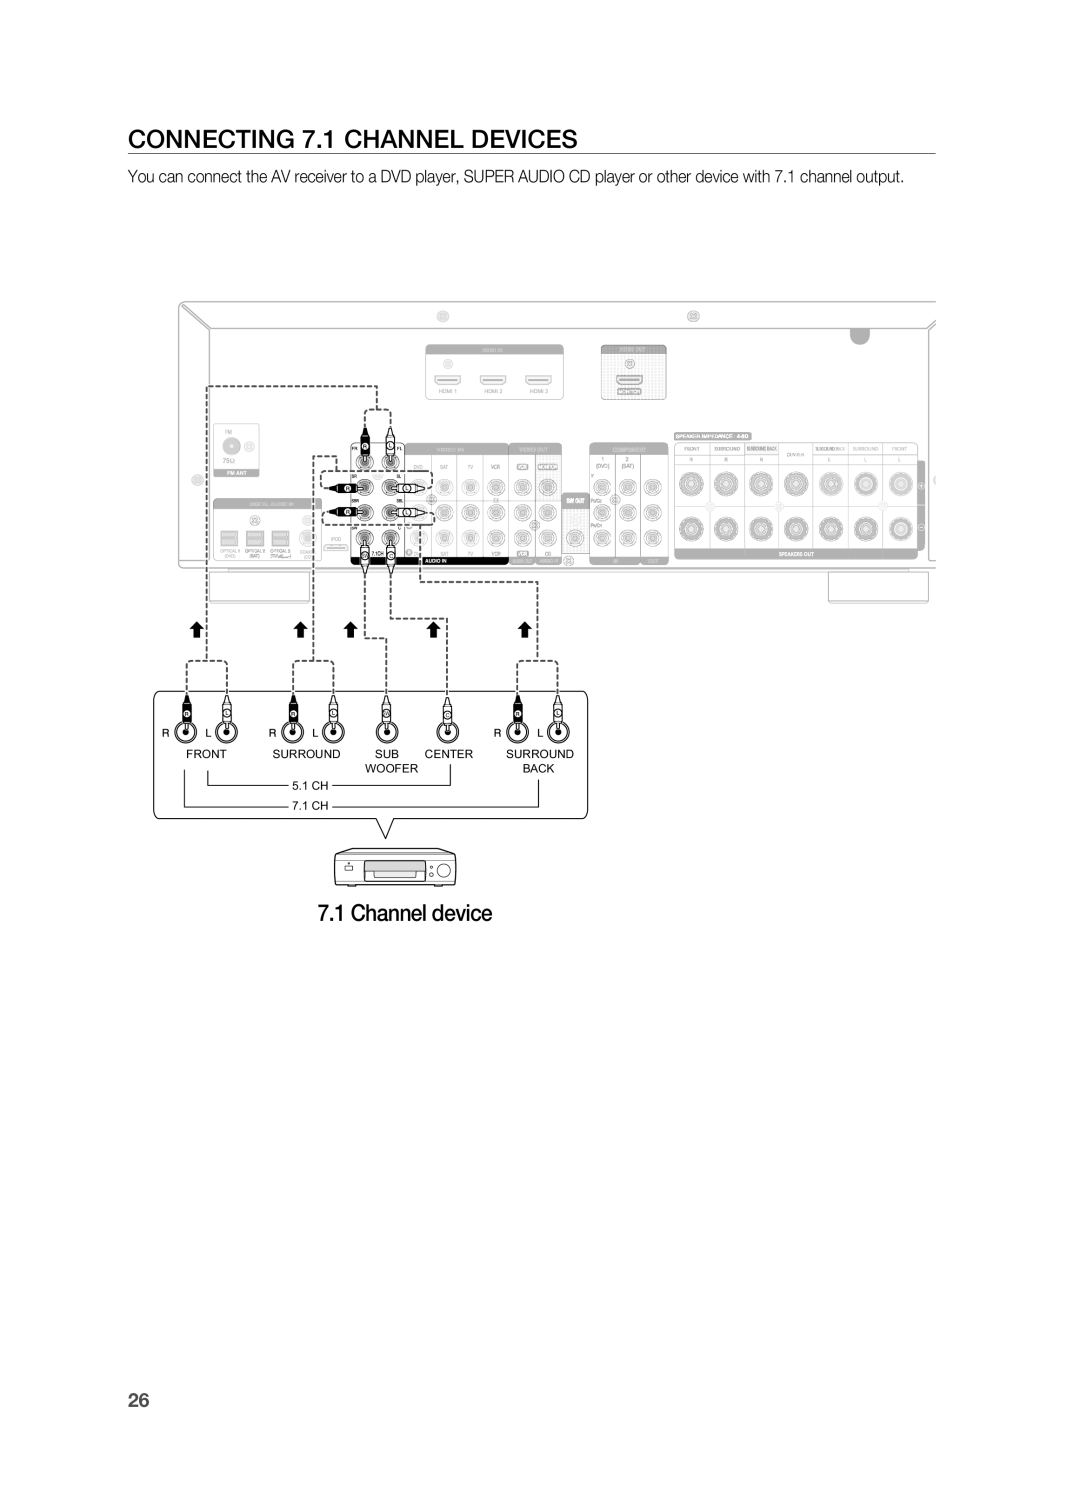 Samsung HT-AS730S user manual Connecting 7.1 channel devices, 7.1Channel device, Sw C Swc 